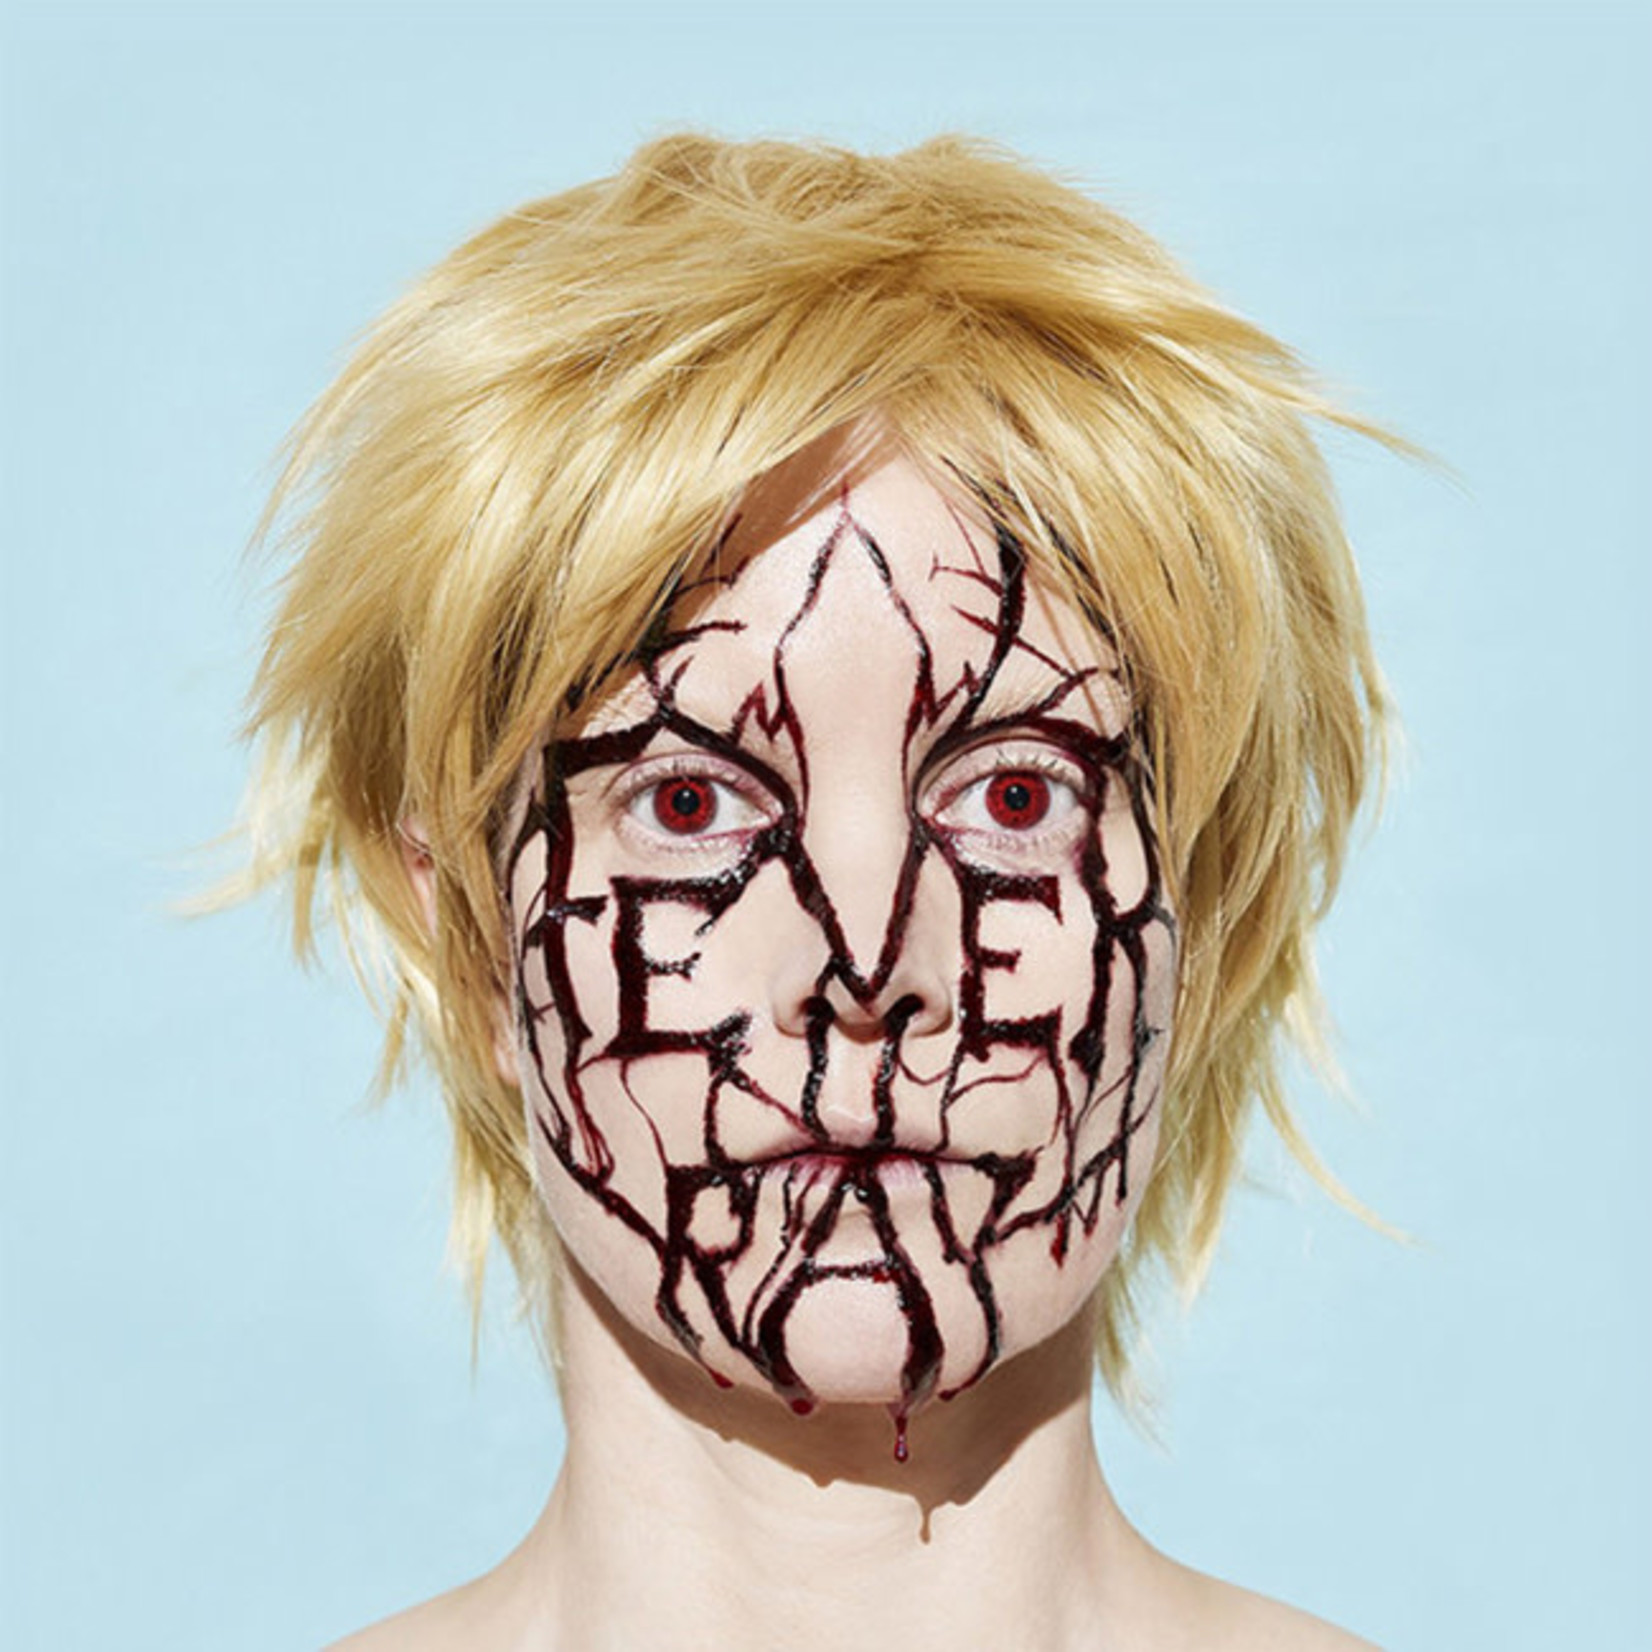 [New] Fever Ray - Plunge